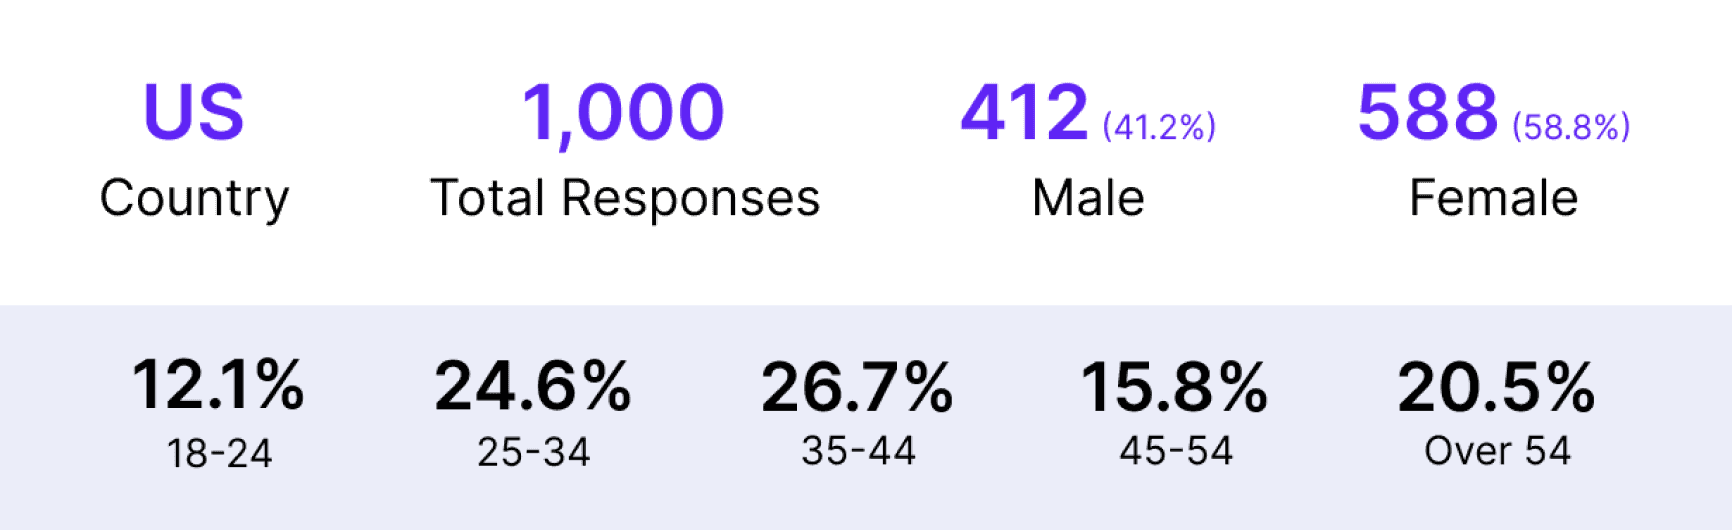 Graphic displaying statistics related to the AI study, including the genders and ages of participants